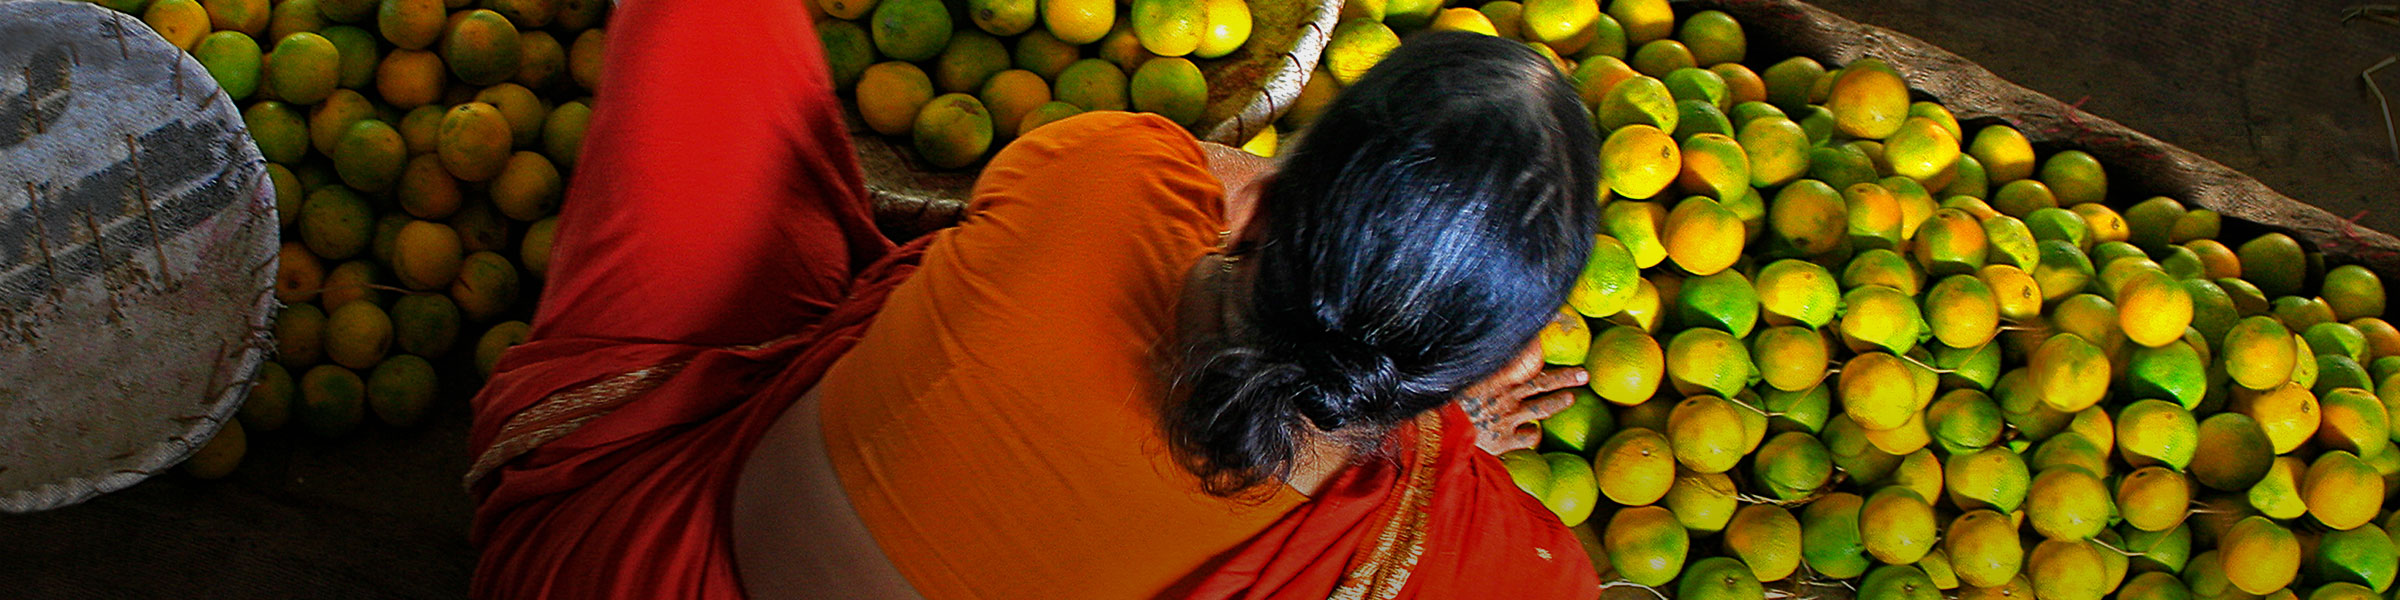 Back of Indian woman with fruits